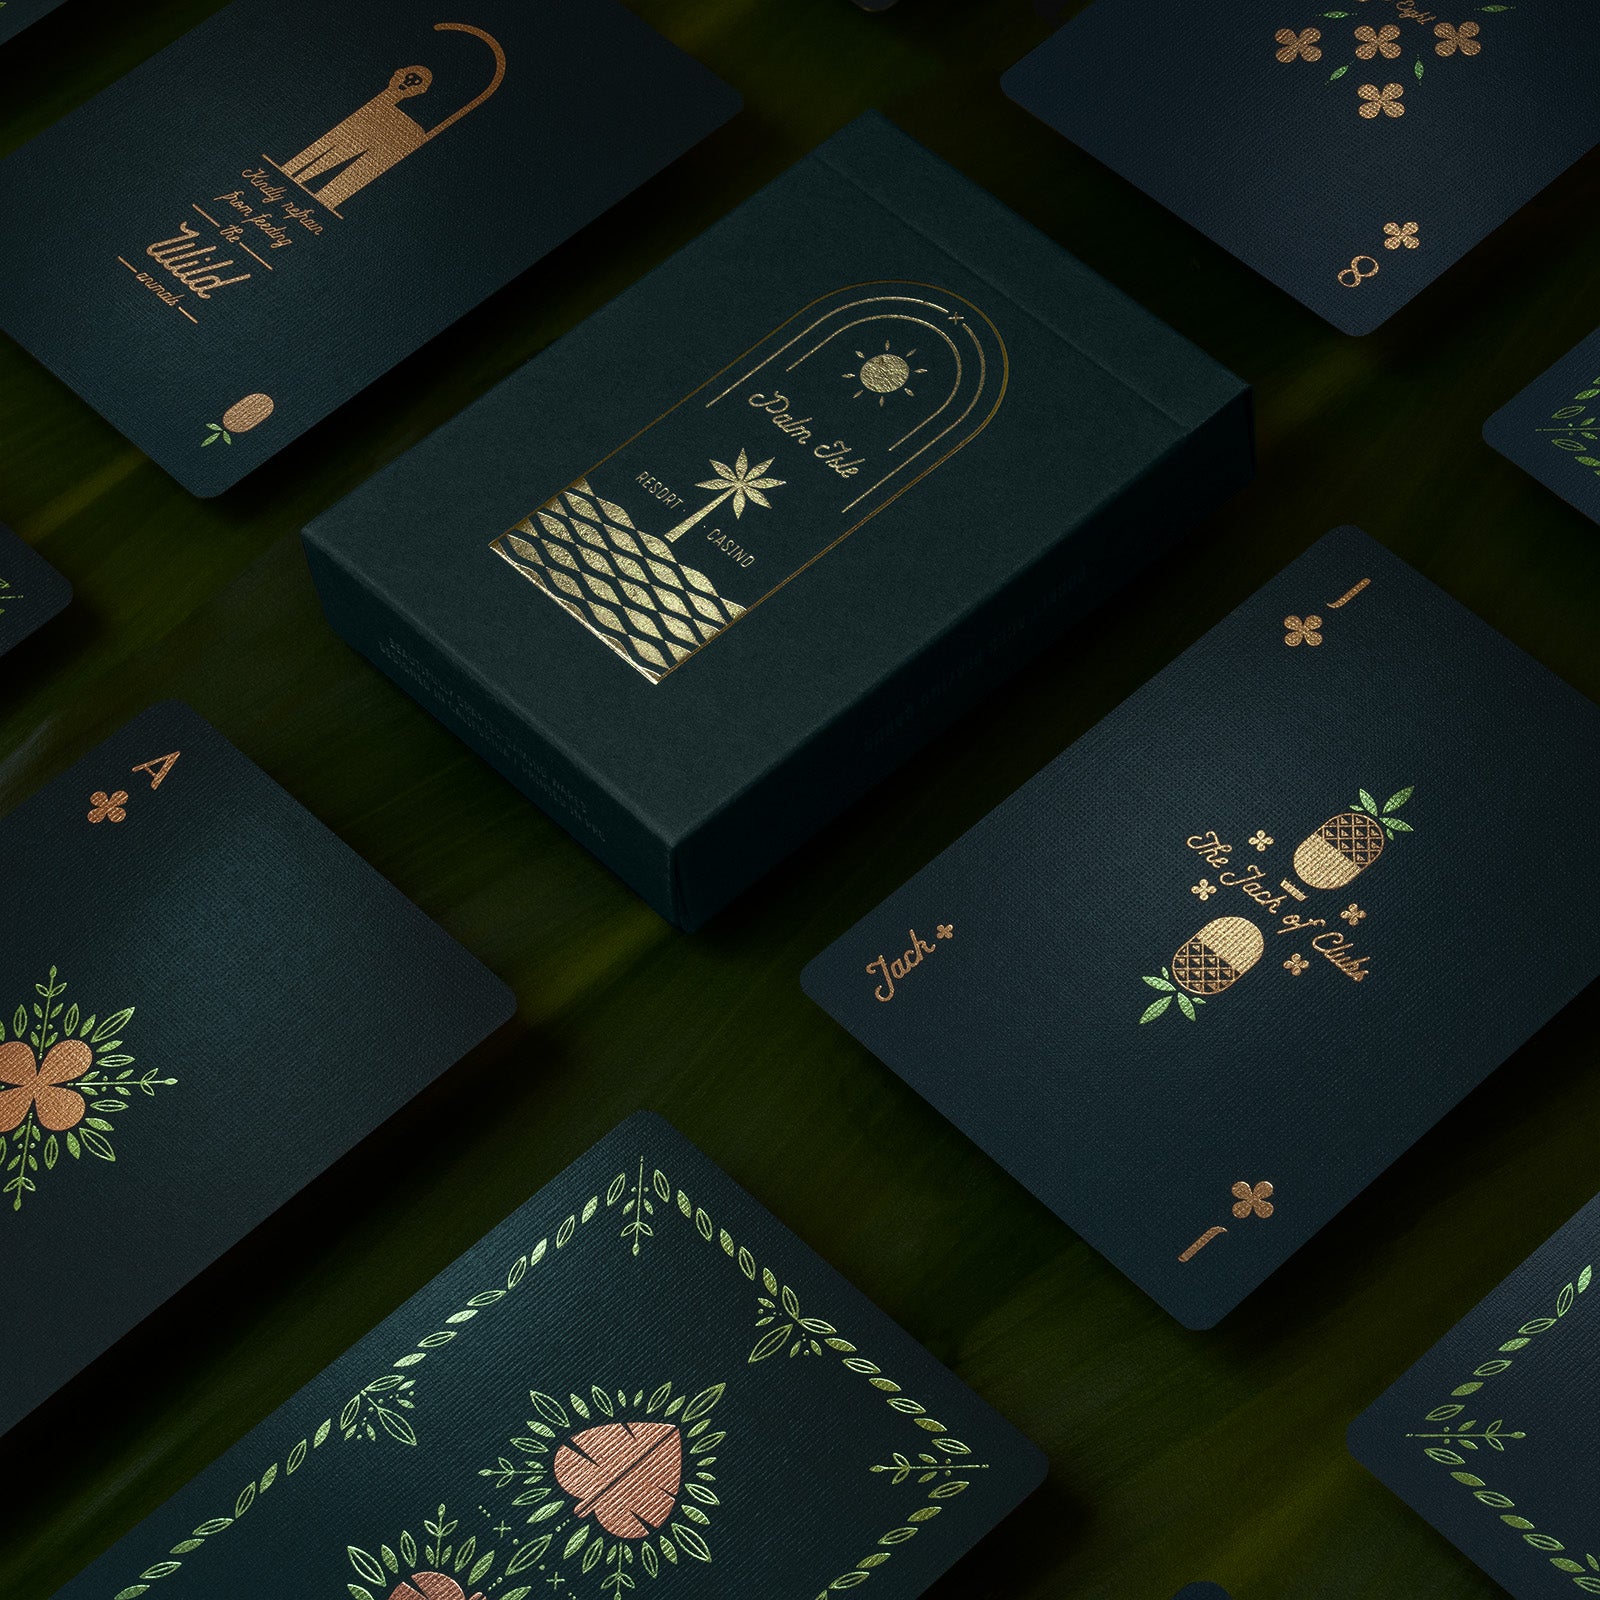 A deck of green playing cards on palm fronds